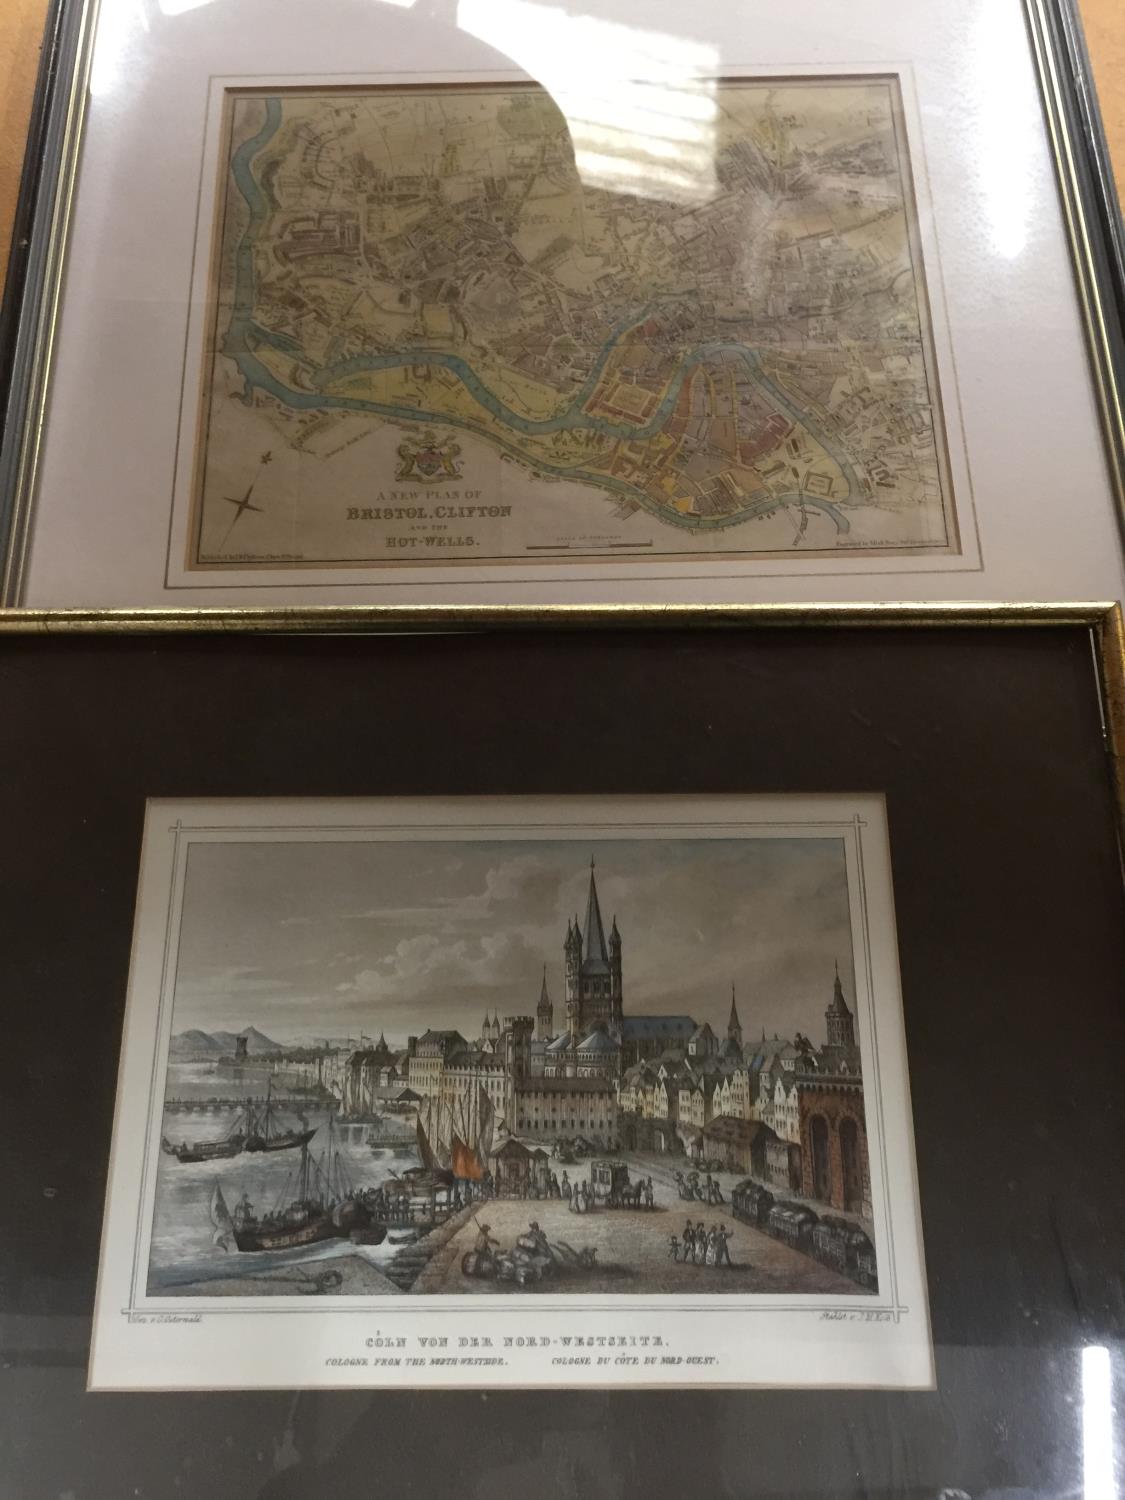 A FRAMED PRINT OF COLOGNE FROM THE NORTH WESTSIDE AND A FRAMED PRINT OF A MAP OF BRISTOL, CLIFTON